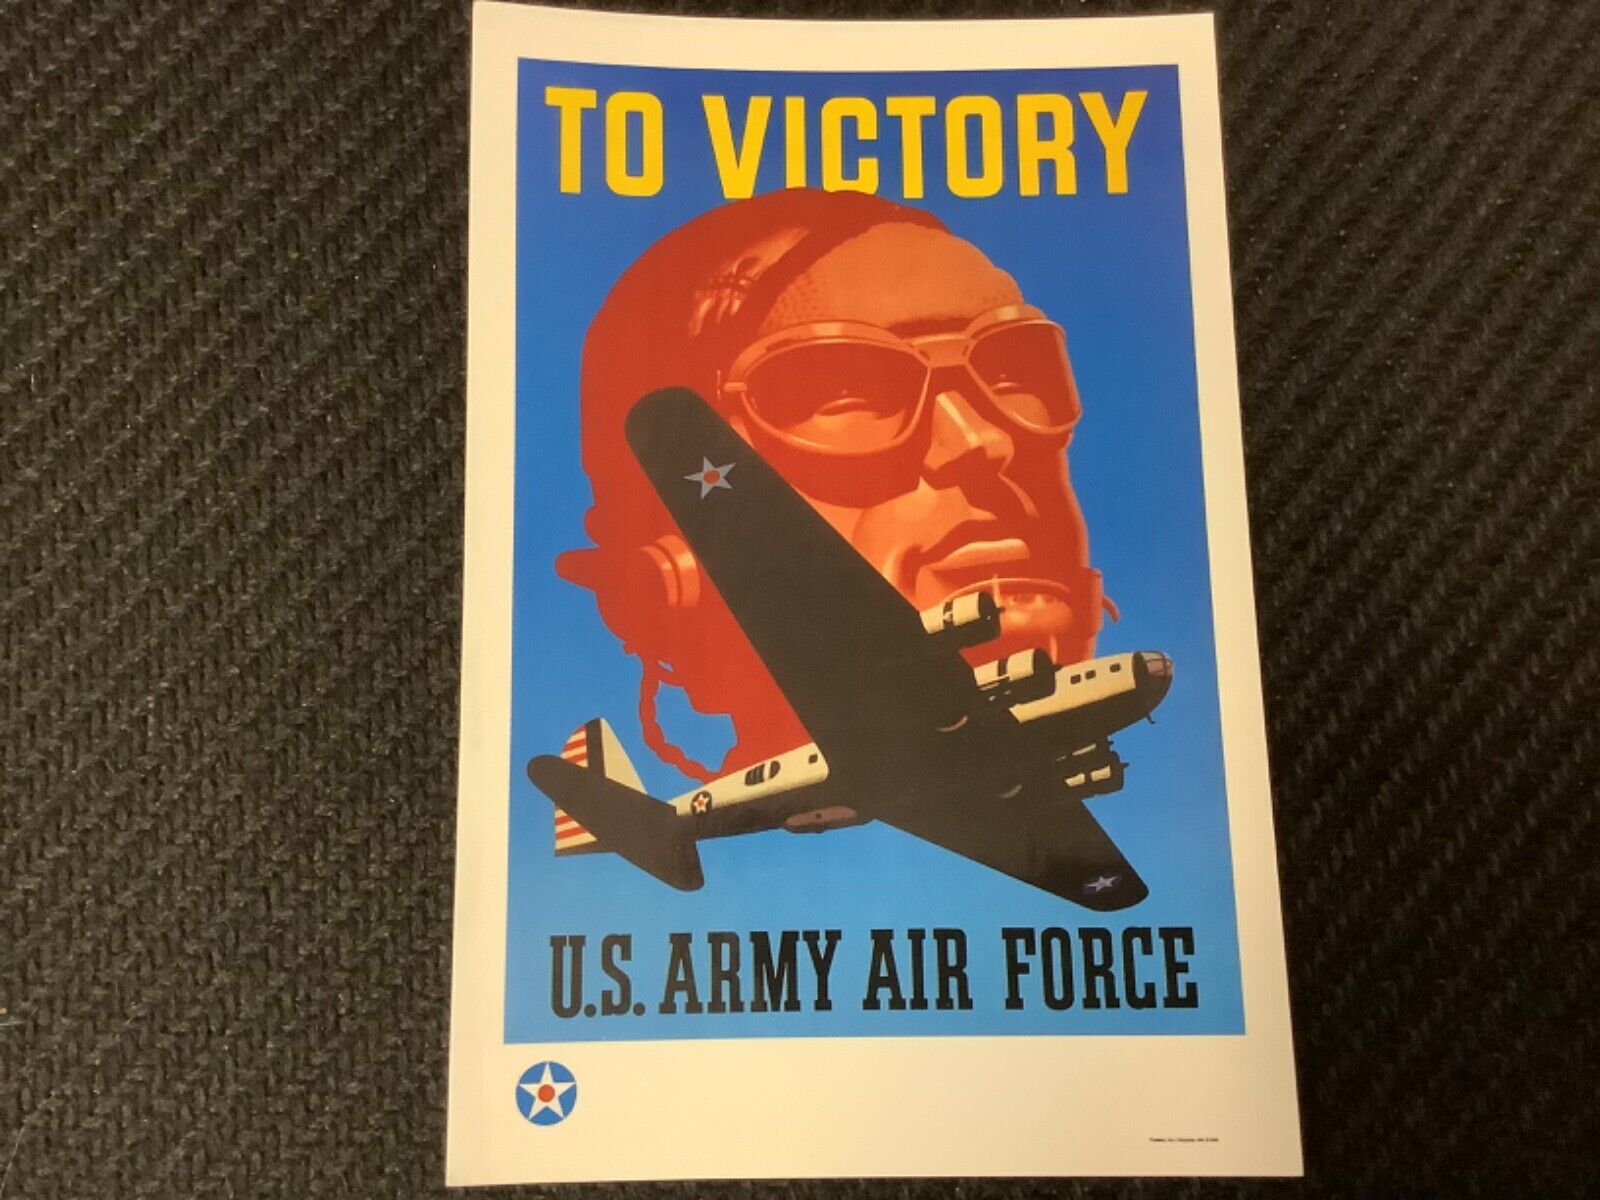 To Victory U.S. Army Air Force Postcard